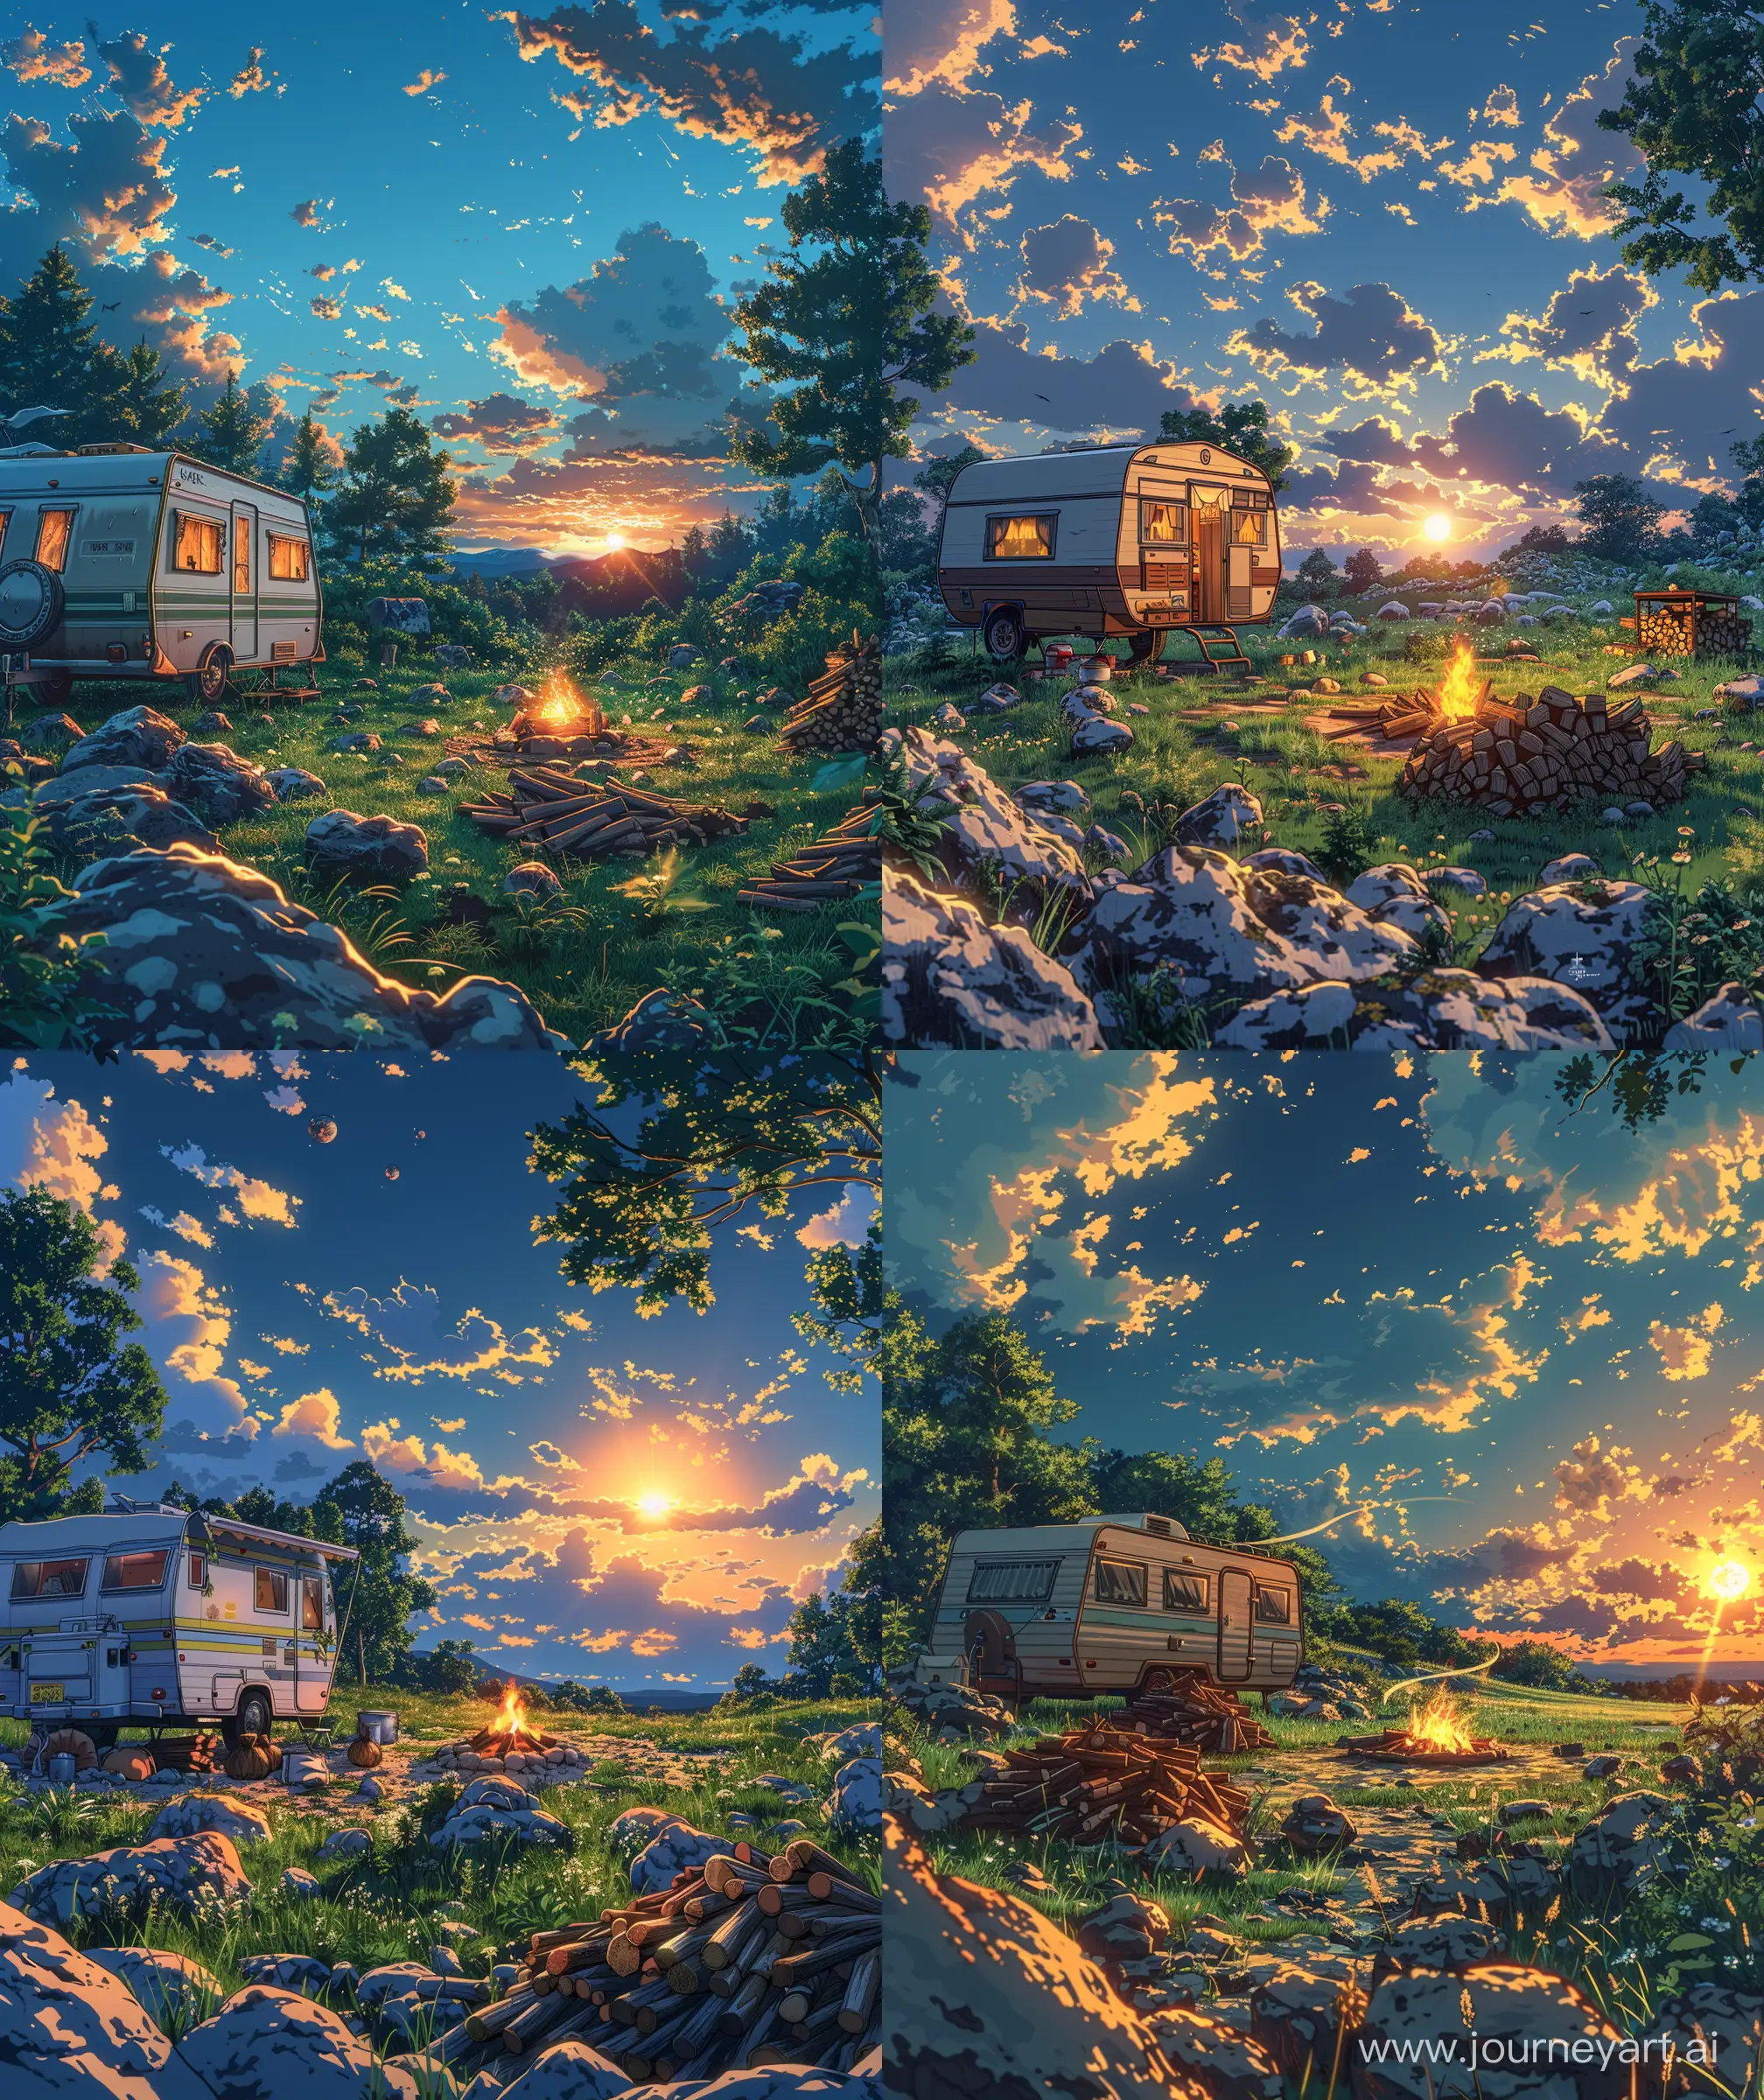 Beautiful anime scenary, mokoto shinkai style, big Caravan camping view, rocks and grassy ground, Bougainville decoration Caravan, fire pit, piles of wood, evening time,  sun showing, clouds, breeze, illustration, close up view, ultra HD, "high quality", sharp details, no hyperrealistic --ar 27:32 --s 400